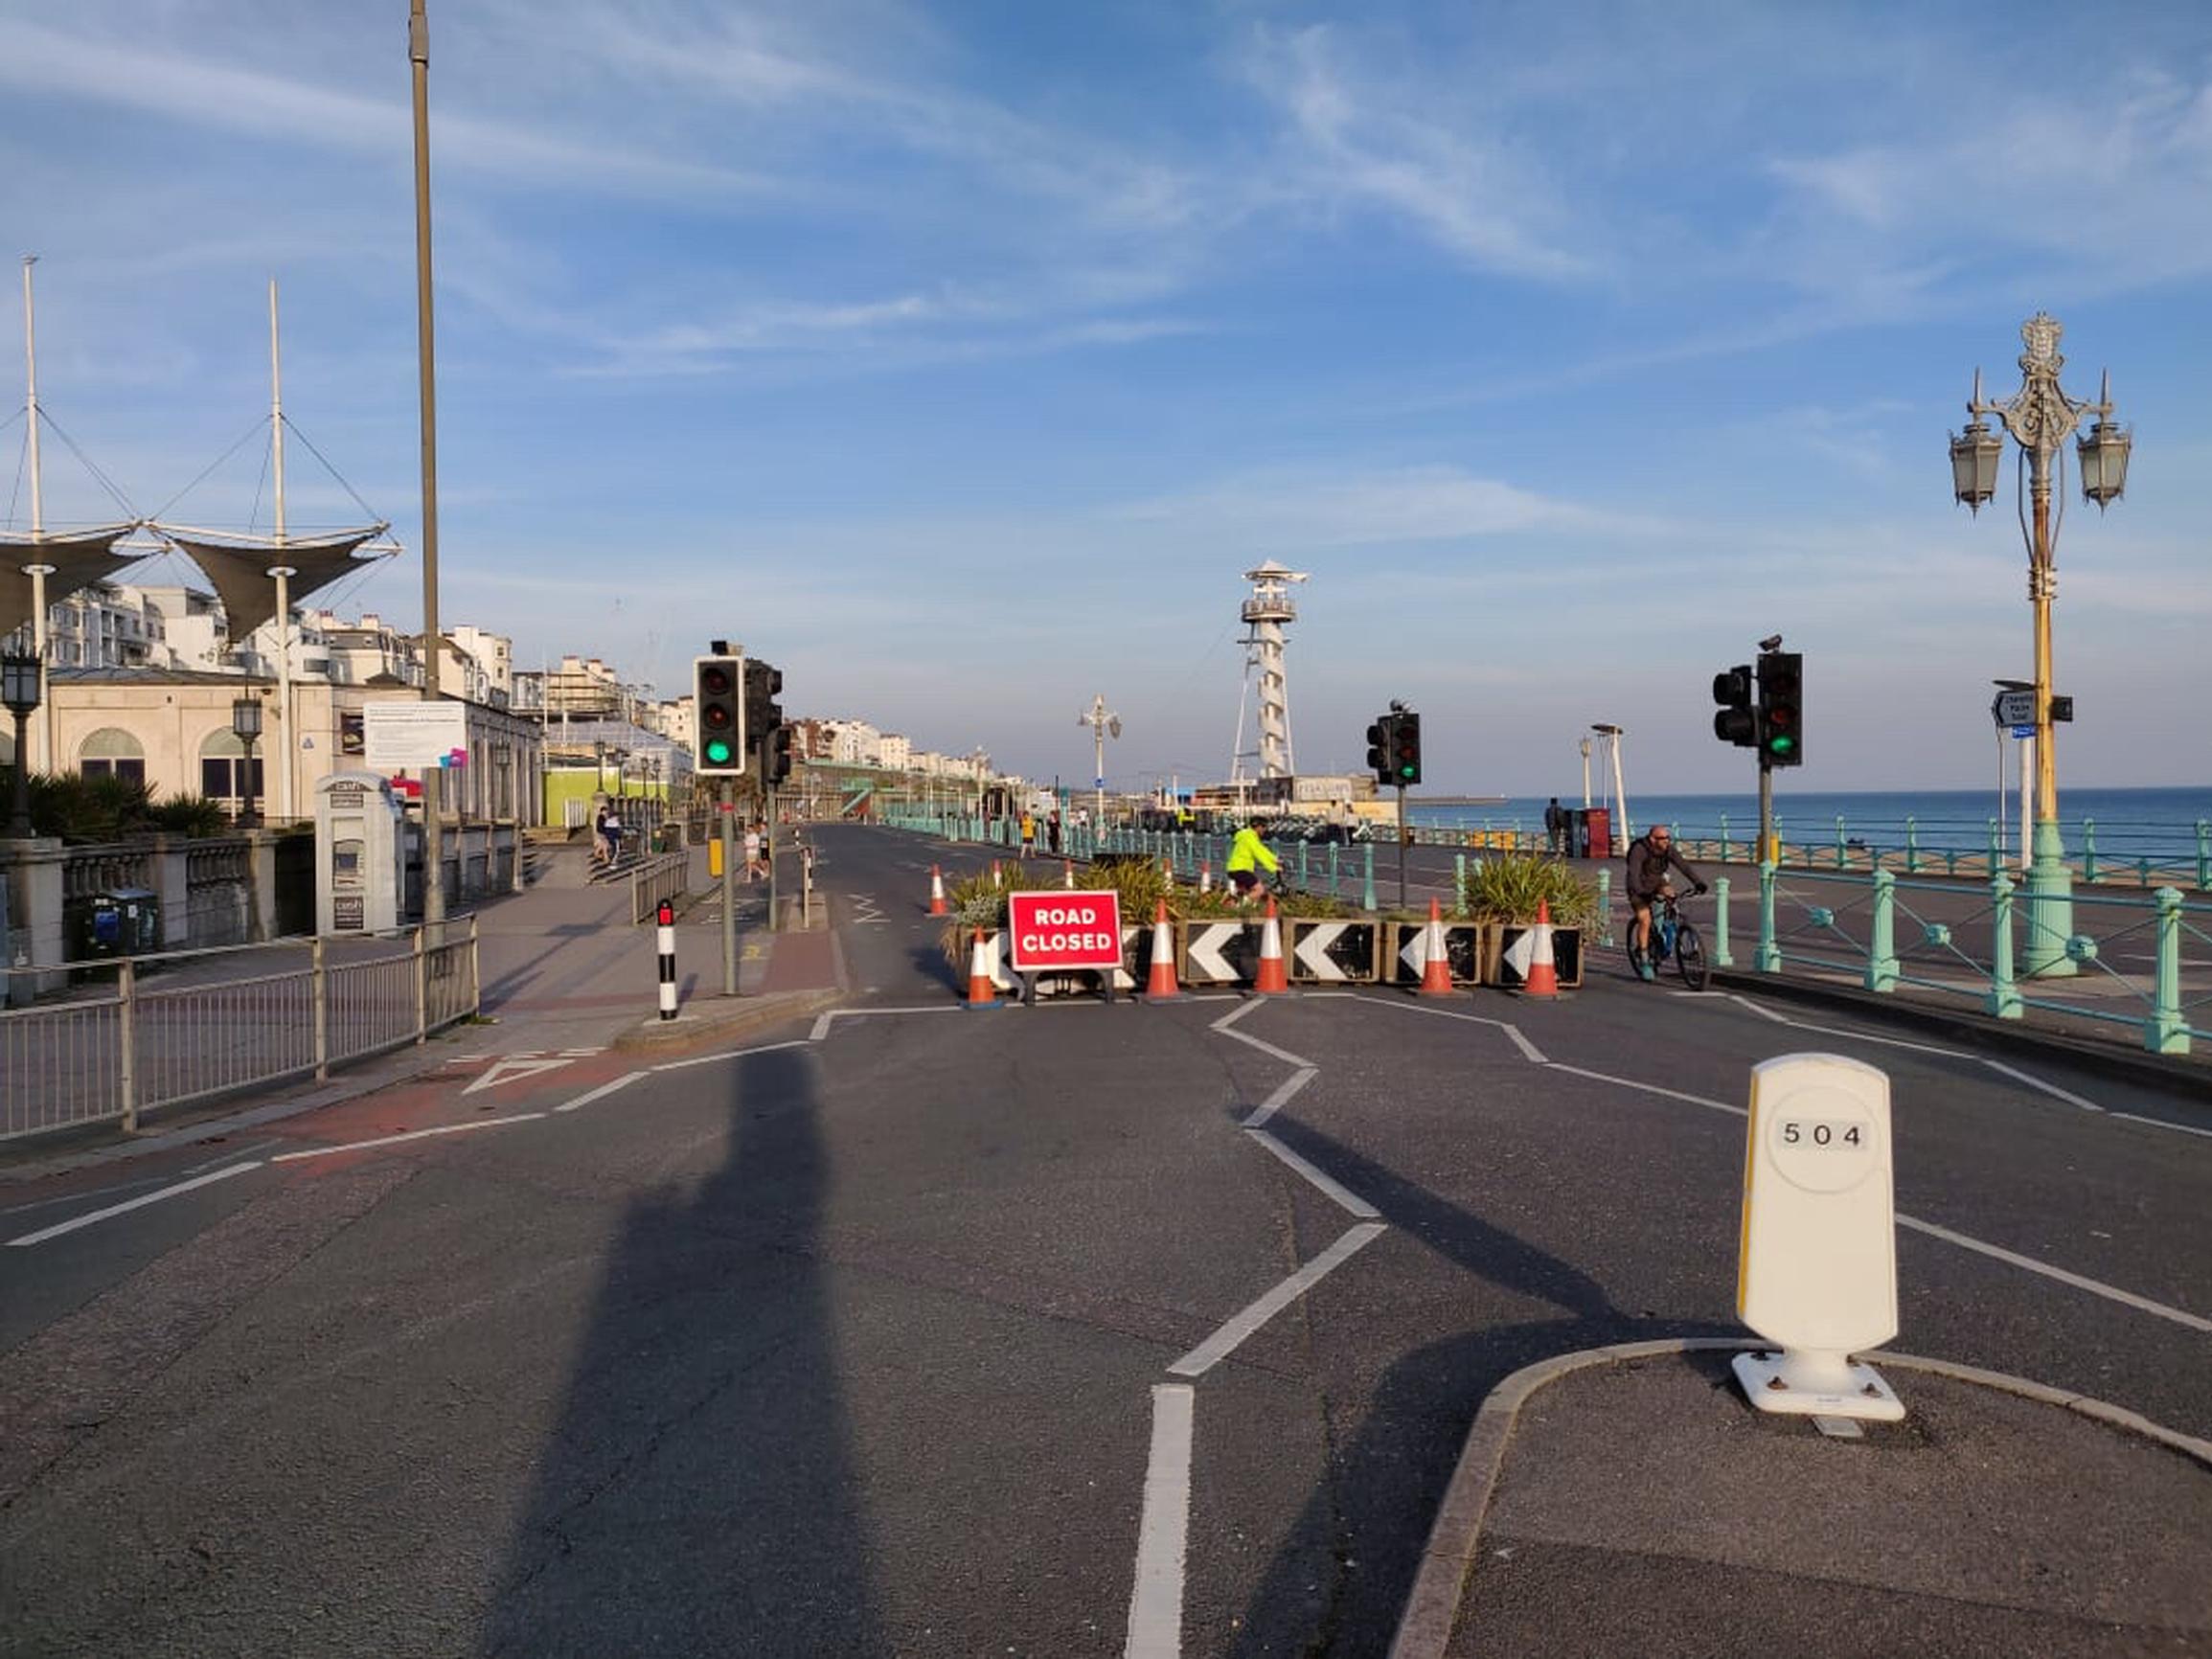 The DfT wishes work to begin `at pace` on making space for physically distancing and walking, widening pavements, closing roads to through traffic and installing segregated cycle lanes, as has happened in Brighton. Photo: Mark Strong